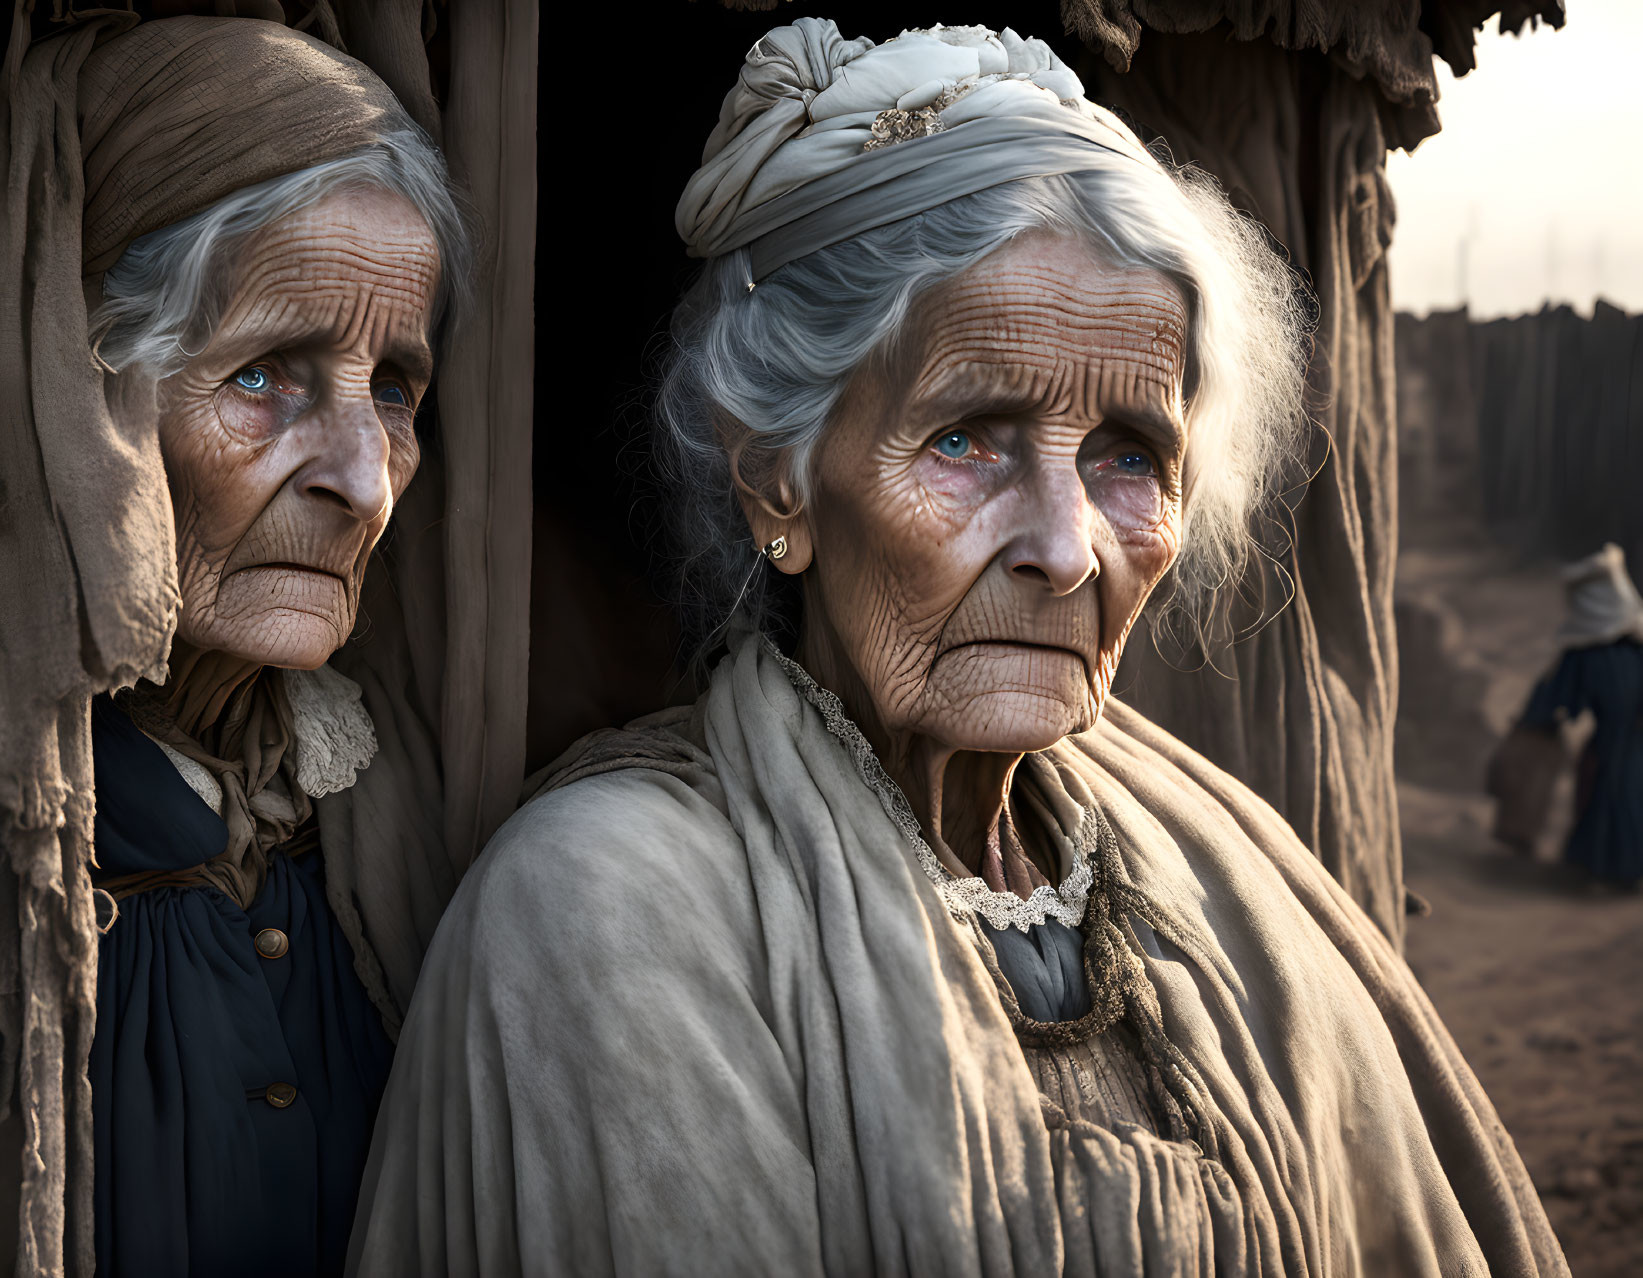 Elderly women in traditional attire near tent with reflective expressions